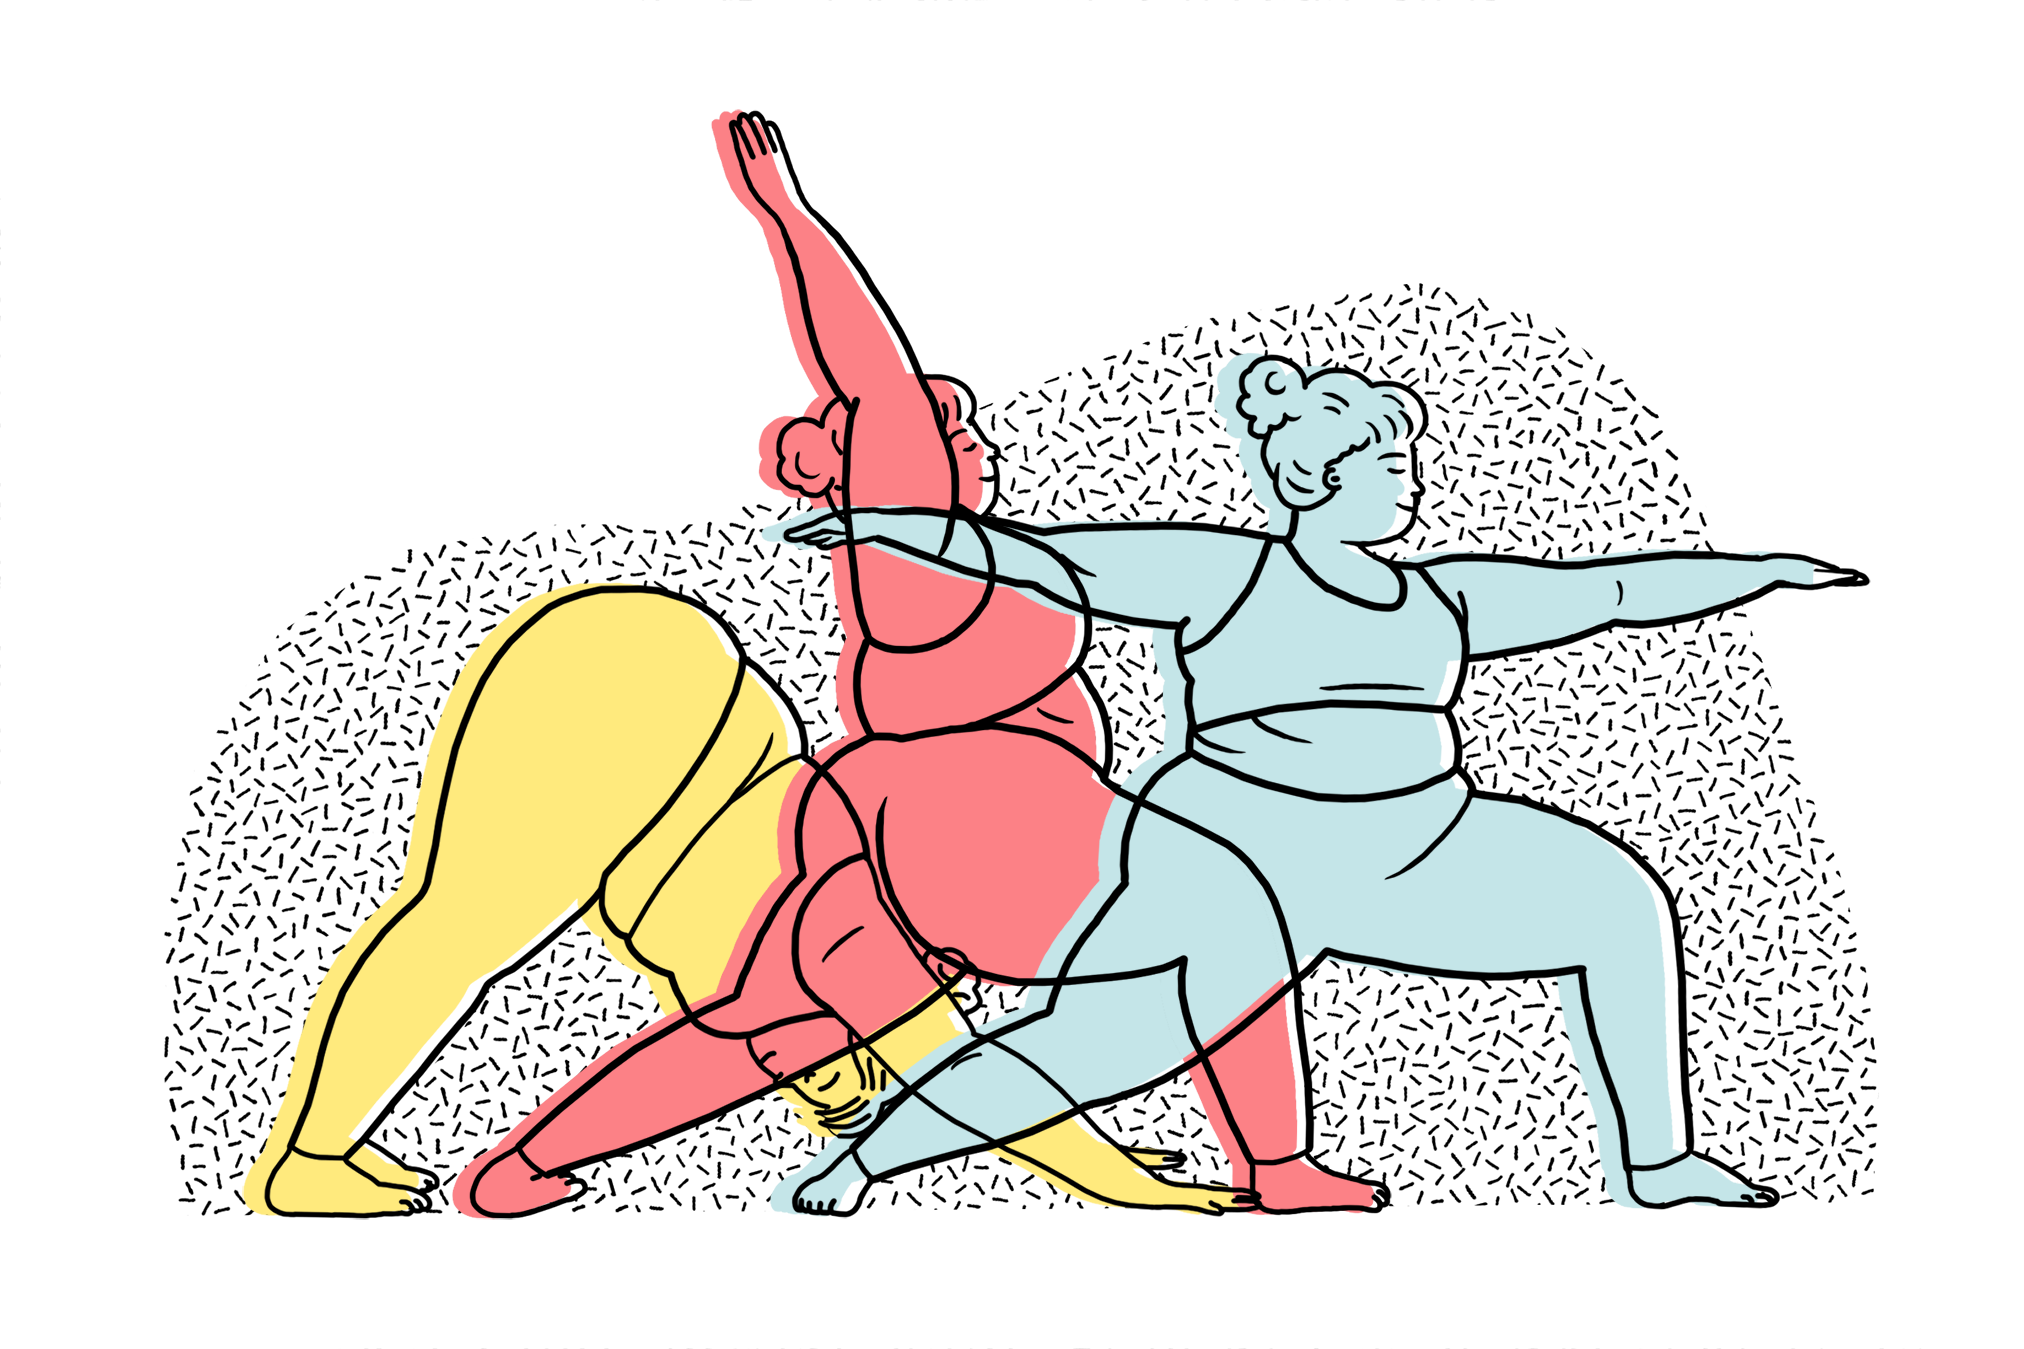 In illustration of various yoga poses